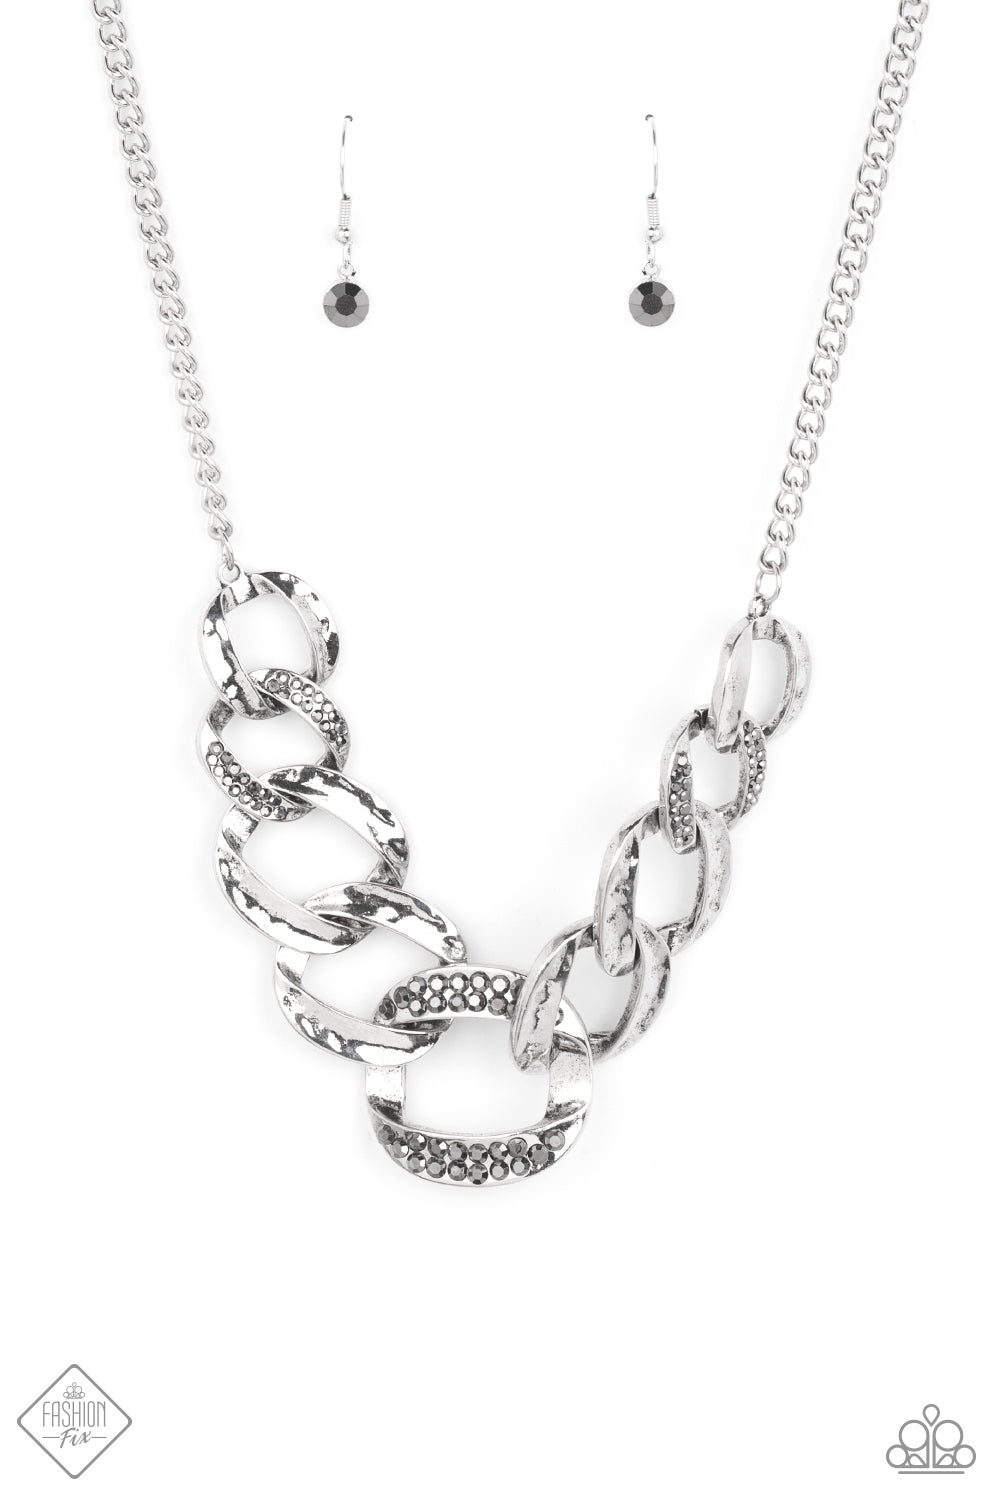 Paparazzi Bombshell Bling - Silver Fashion Fix Necklace - A Finishing Touch Jewelry